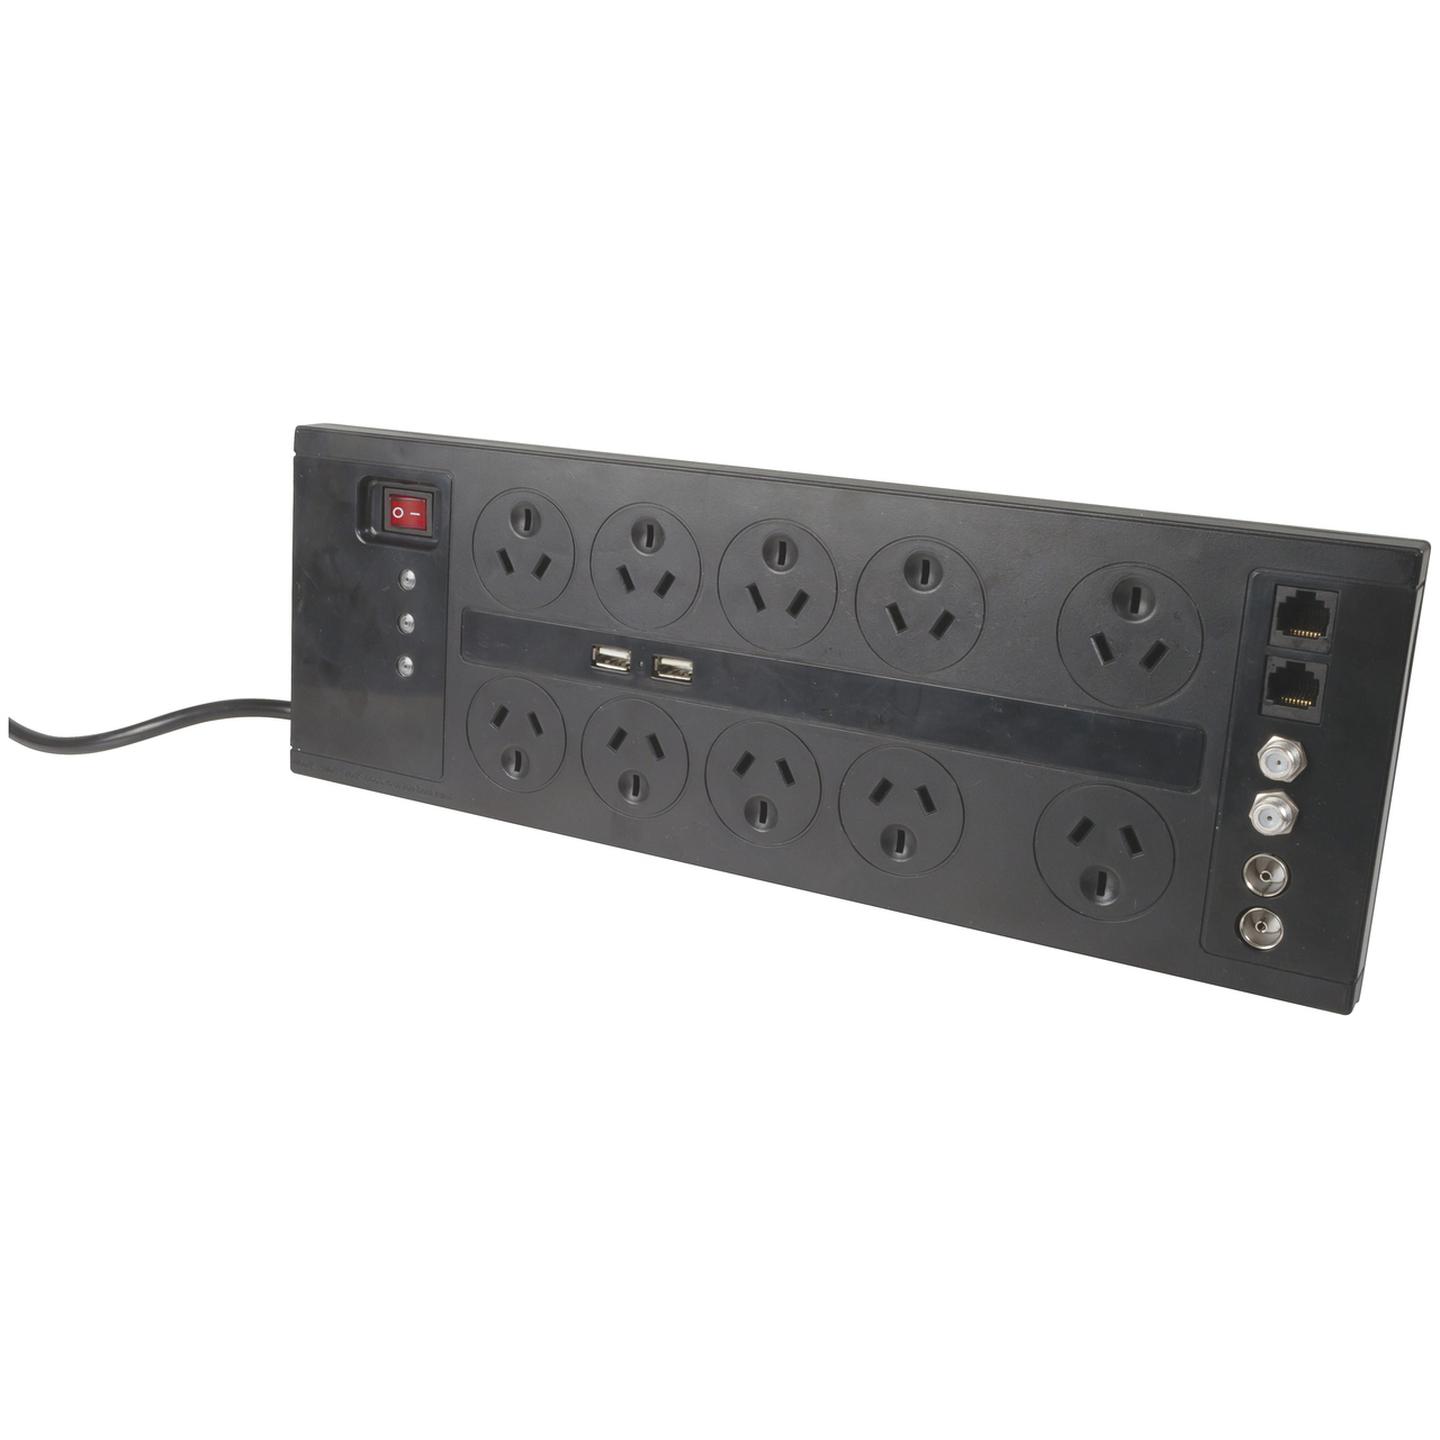 10 Way Home Theatre Surge Protected Powerboard